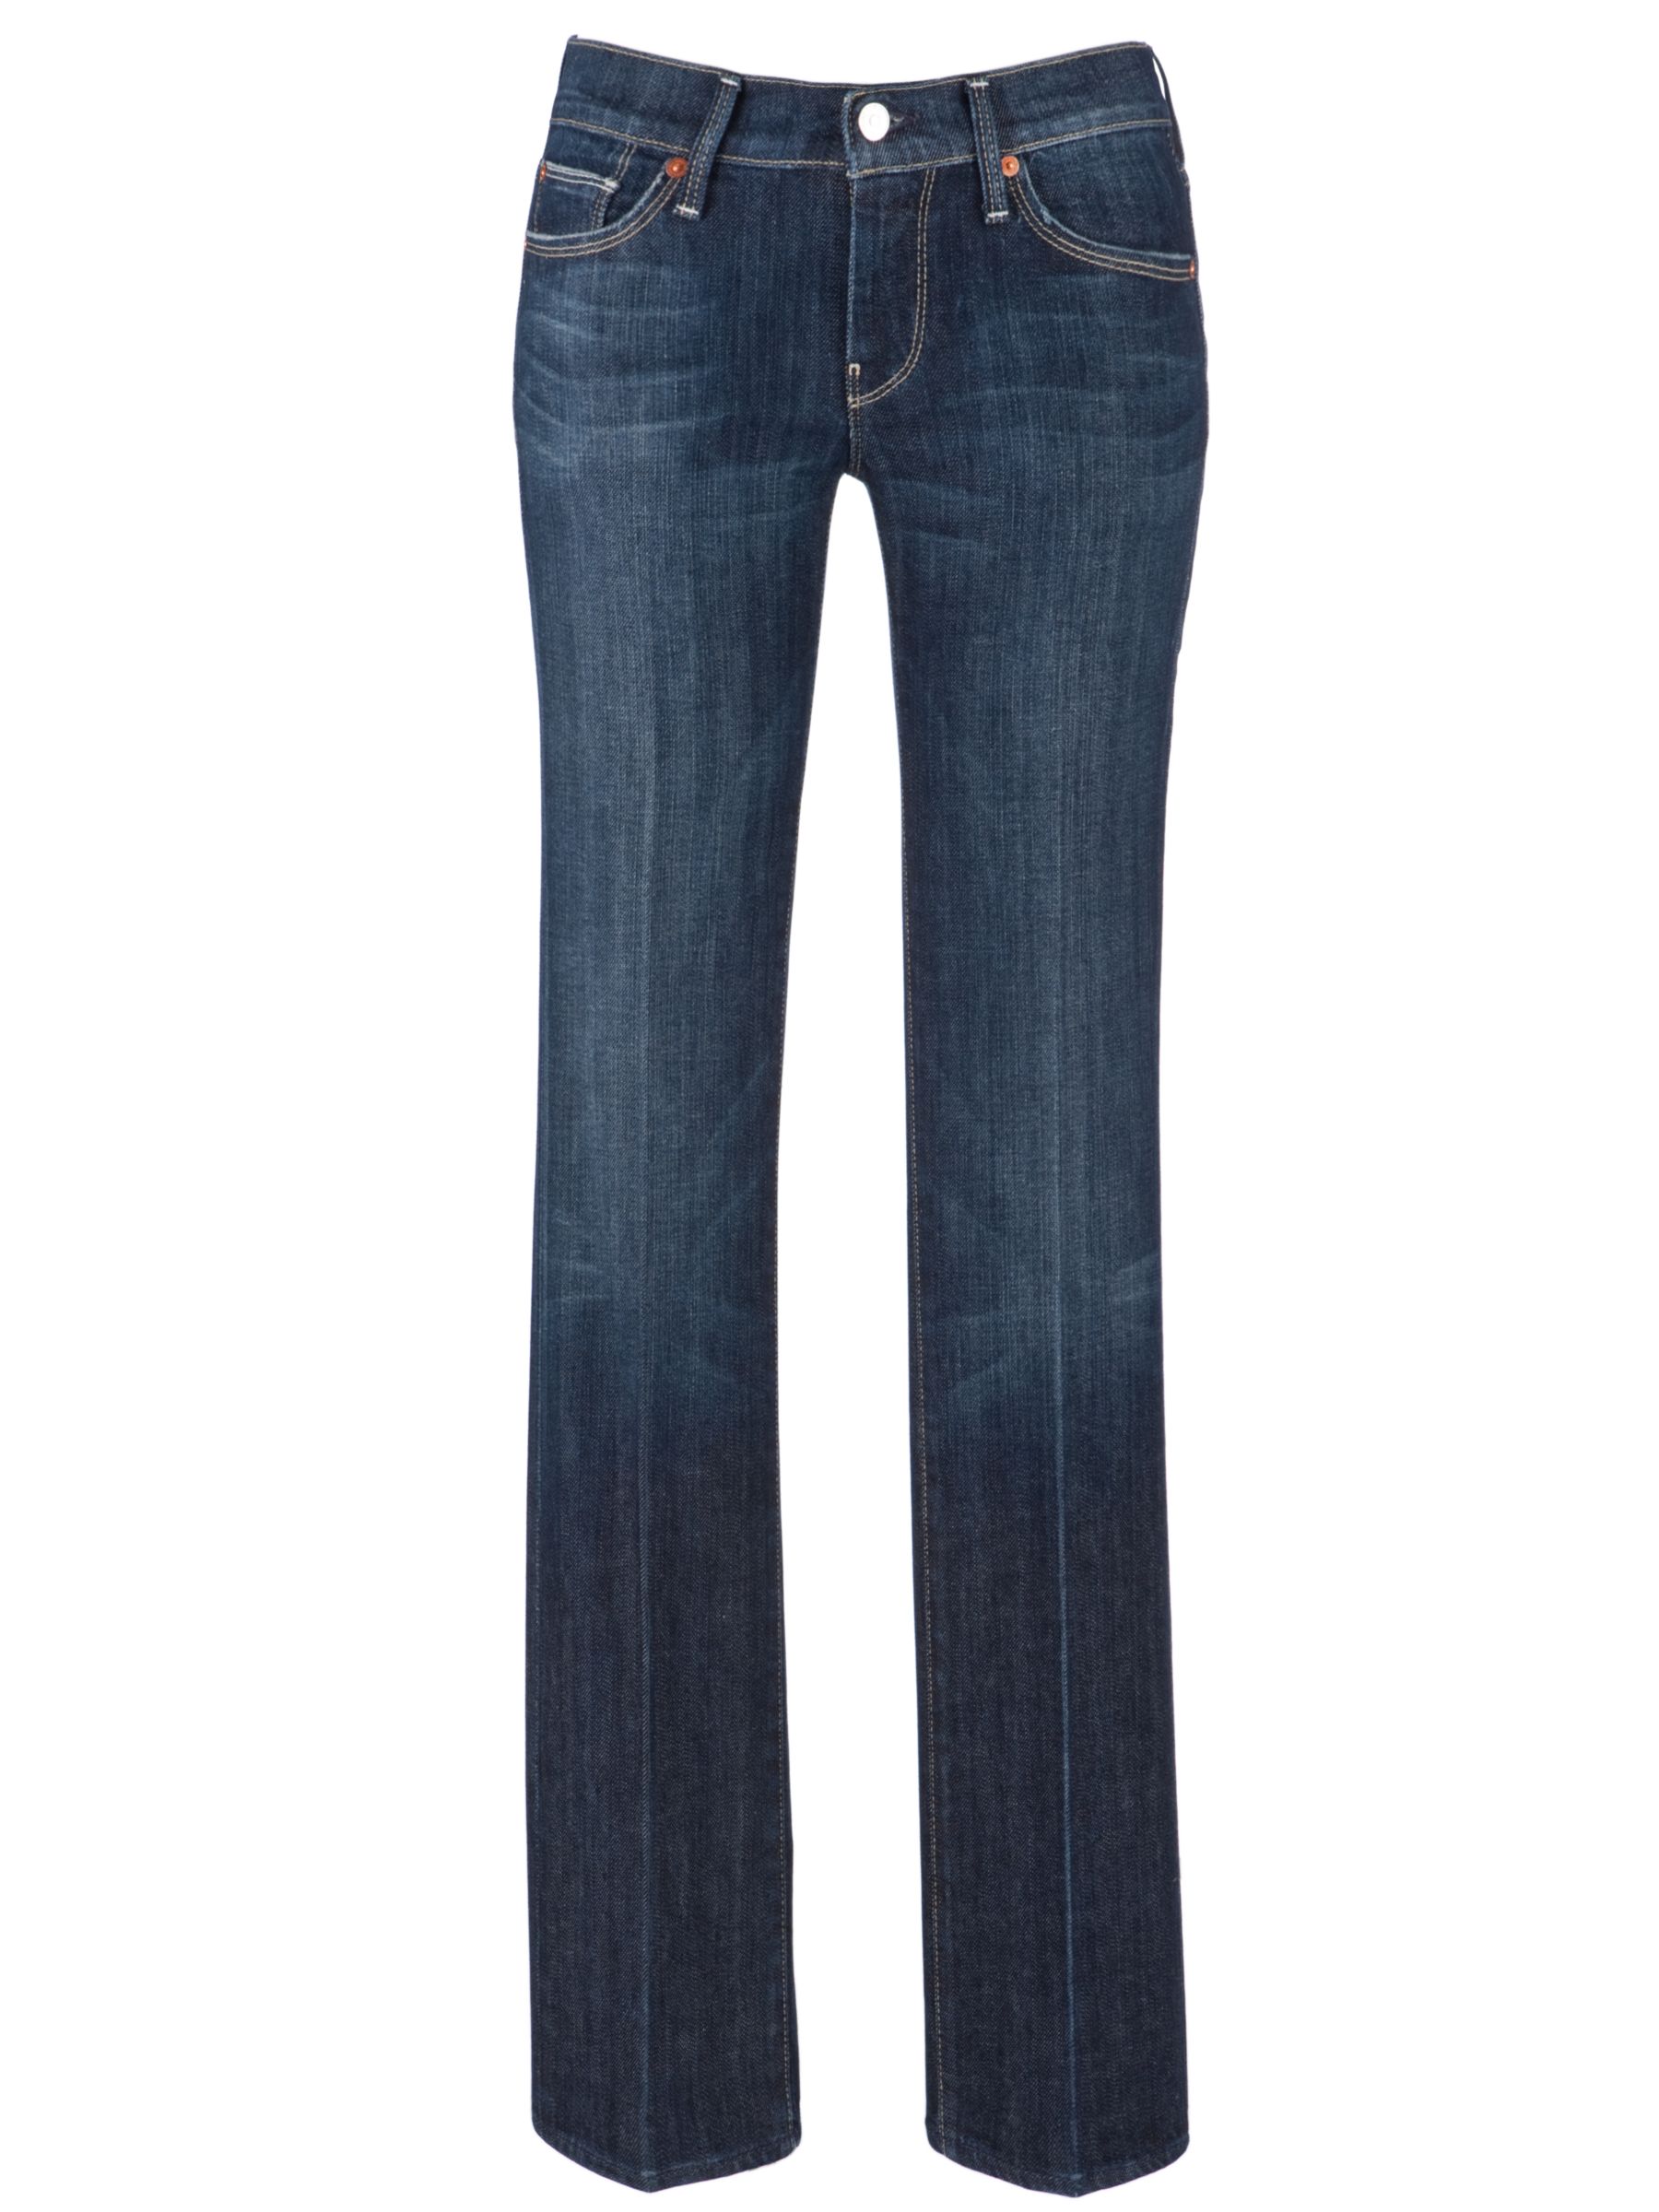 7 For All Mankind Mid Rise Stretch Straight Leg Jeans, New York Dark at John Lewis